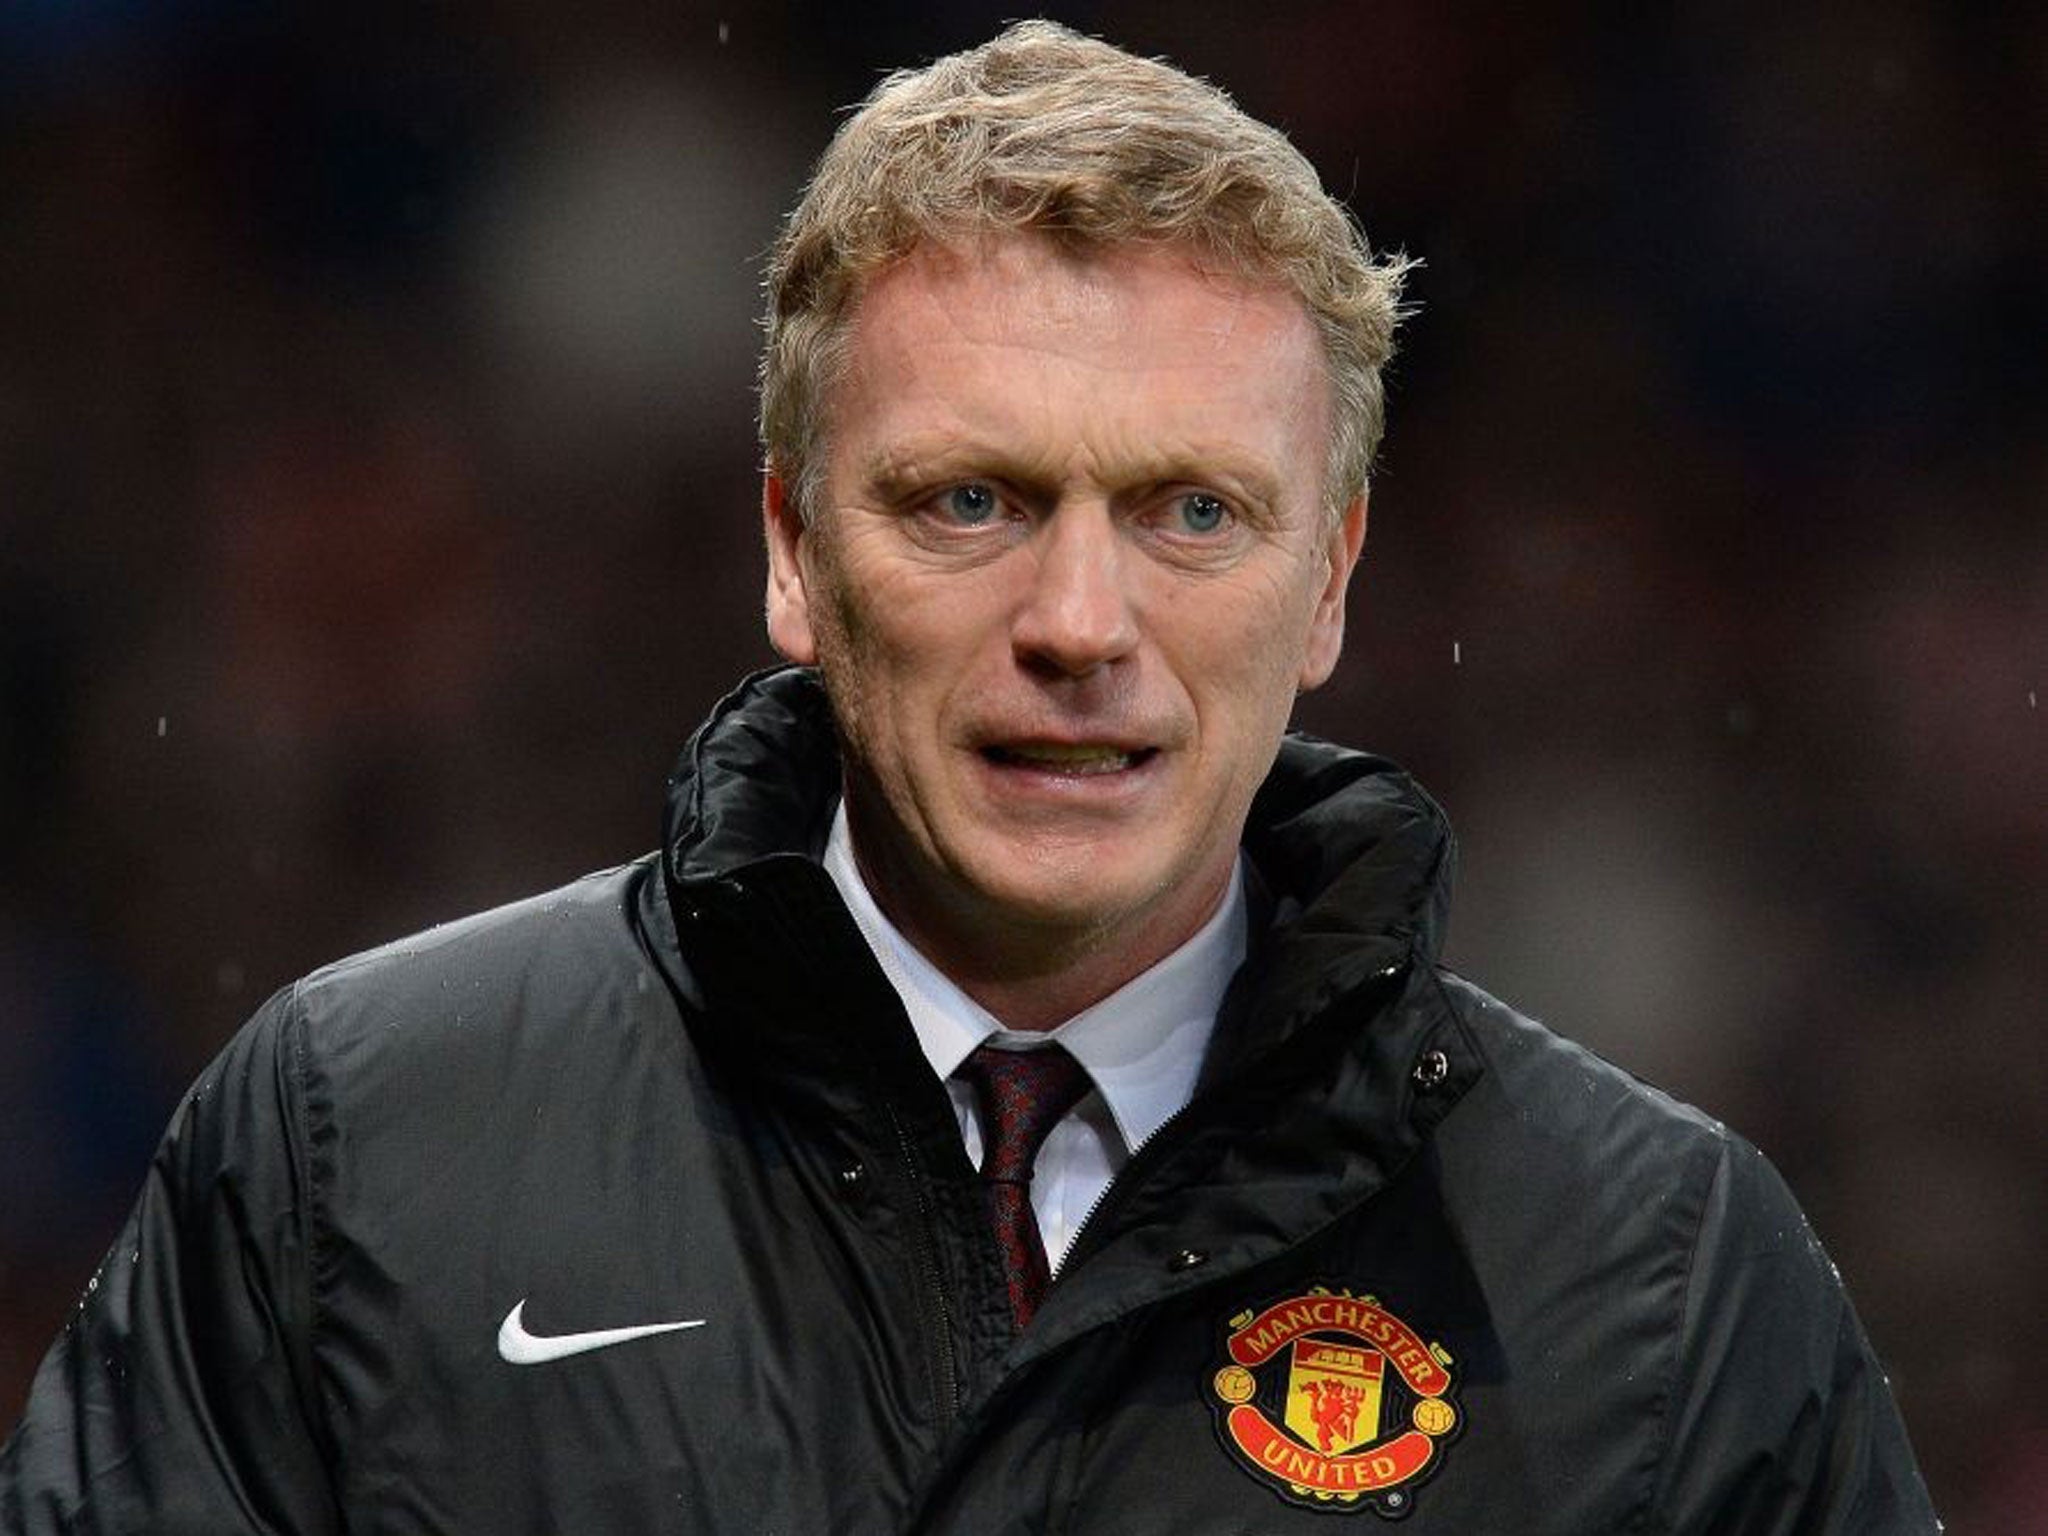 Moyes admitted to trying to sign the veteran Roma midfielder, Daniele de Rossi over the summer